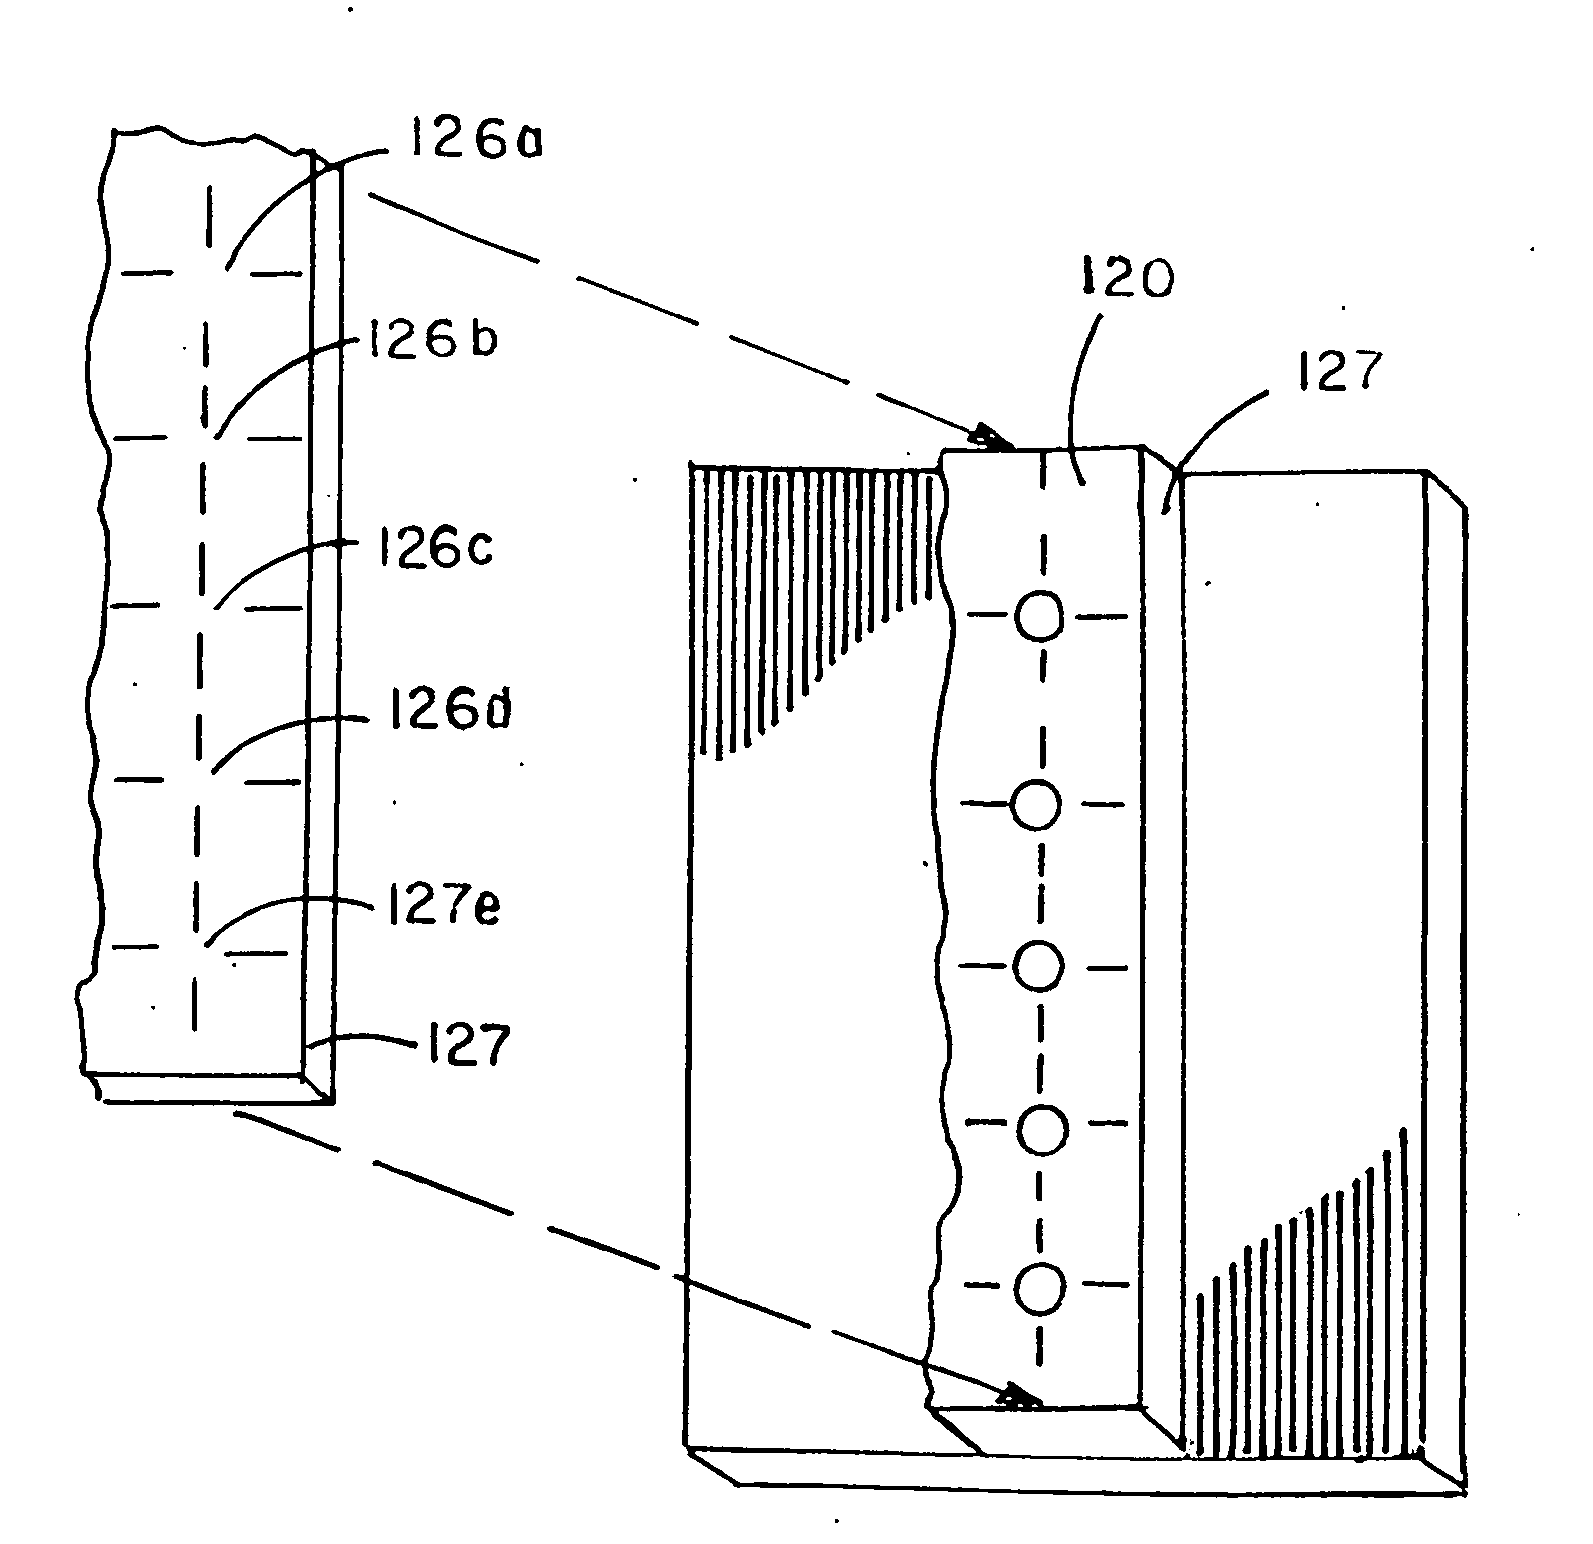 Millimeter-sized recognition signal badge and identification system for accurately discerning and sorting among similar kinds, shapes, and sizes of surgical instruments